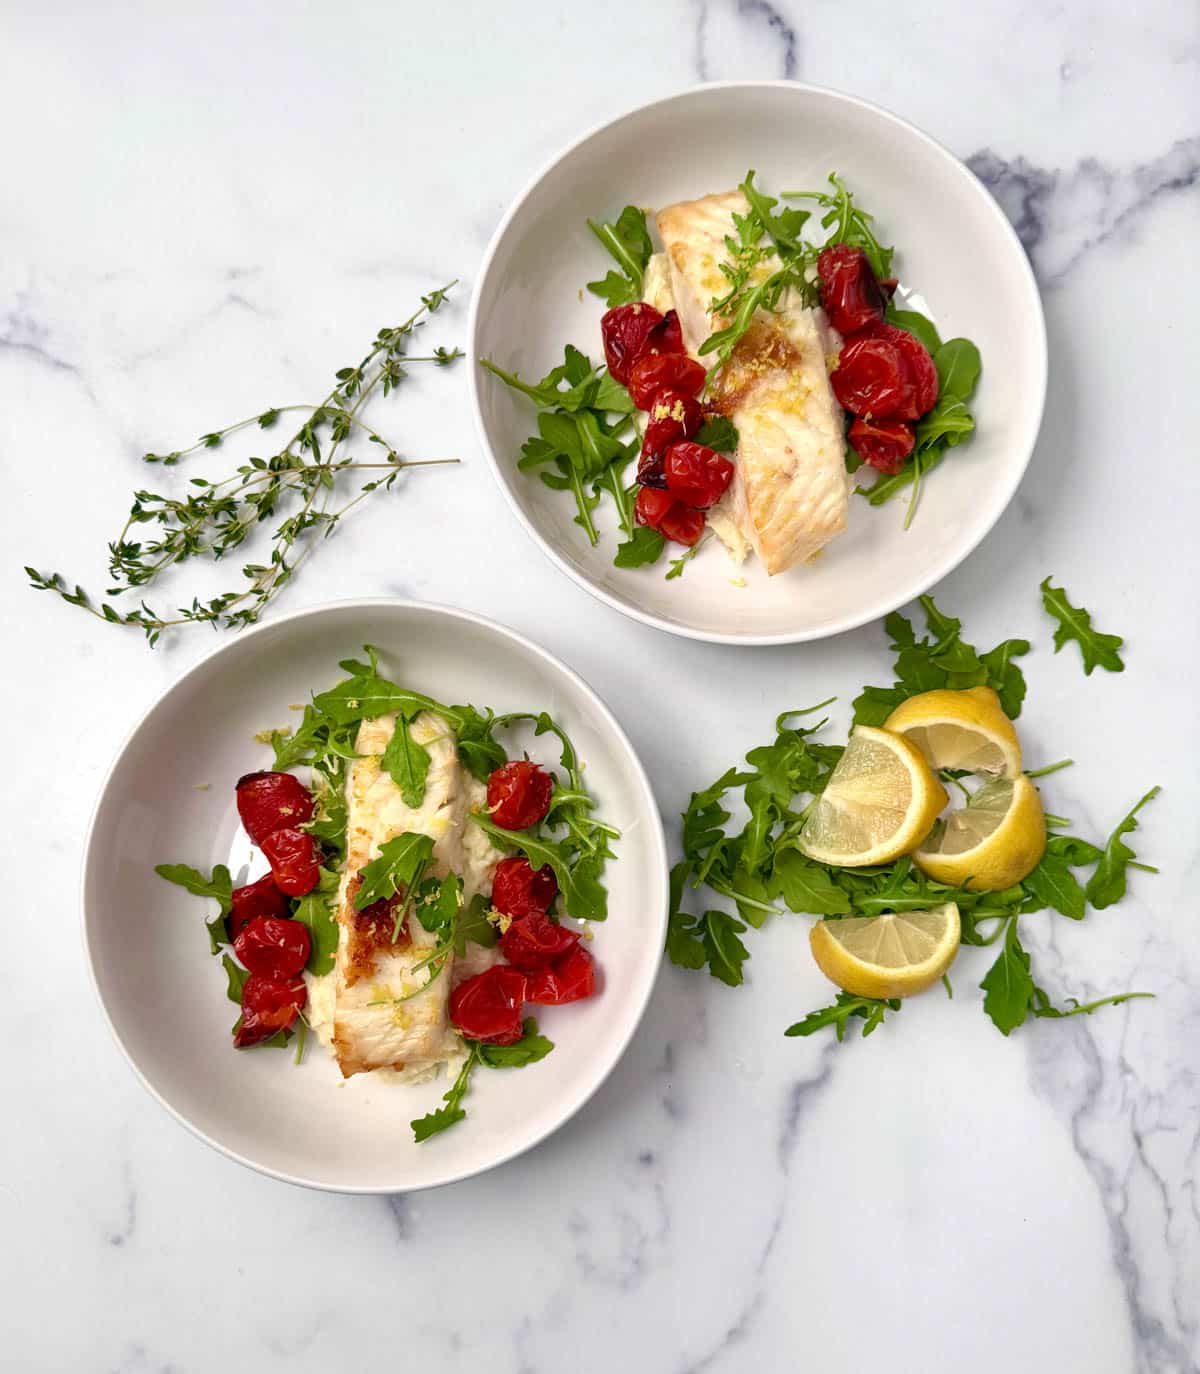 Seared fish served over mashed parsnips with roasted cherry tomatoes and arugula, served in a white bowl, with arugula and lemon wedges on the side.